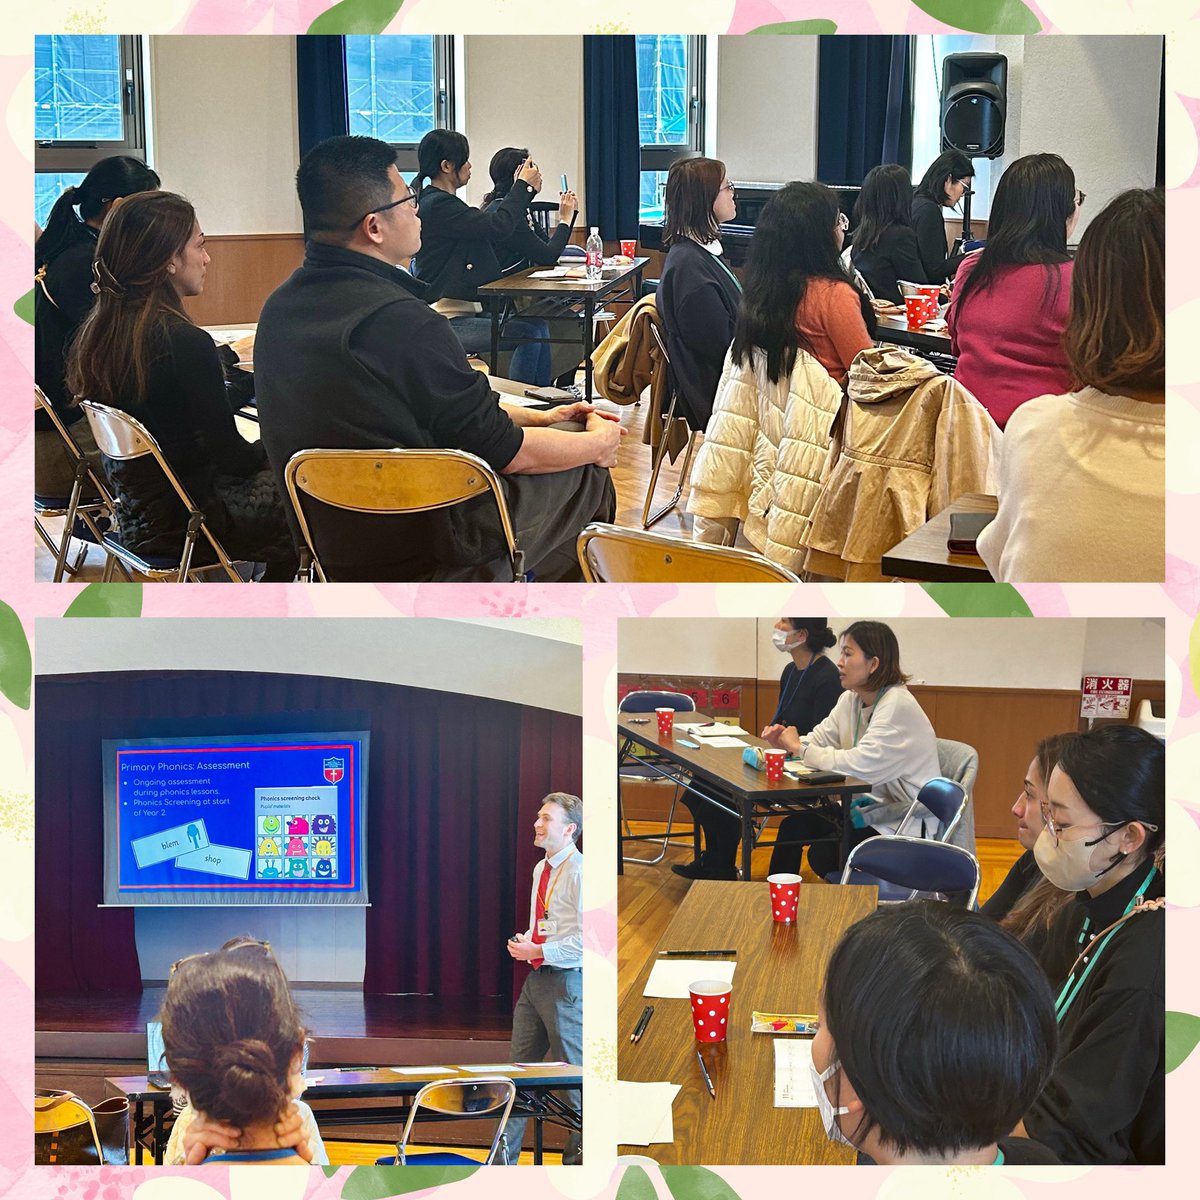 Great turnout for today’s #smiskobe parent workshop as our presenters share a range of strategies to support reading skills #collaboration #community #Parents @The_IEYC @The_IPC